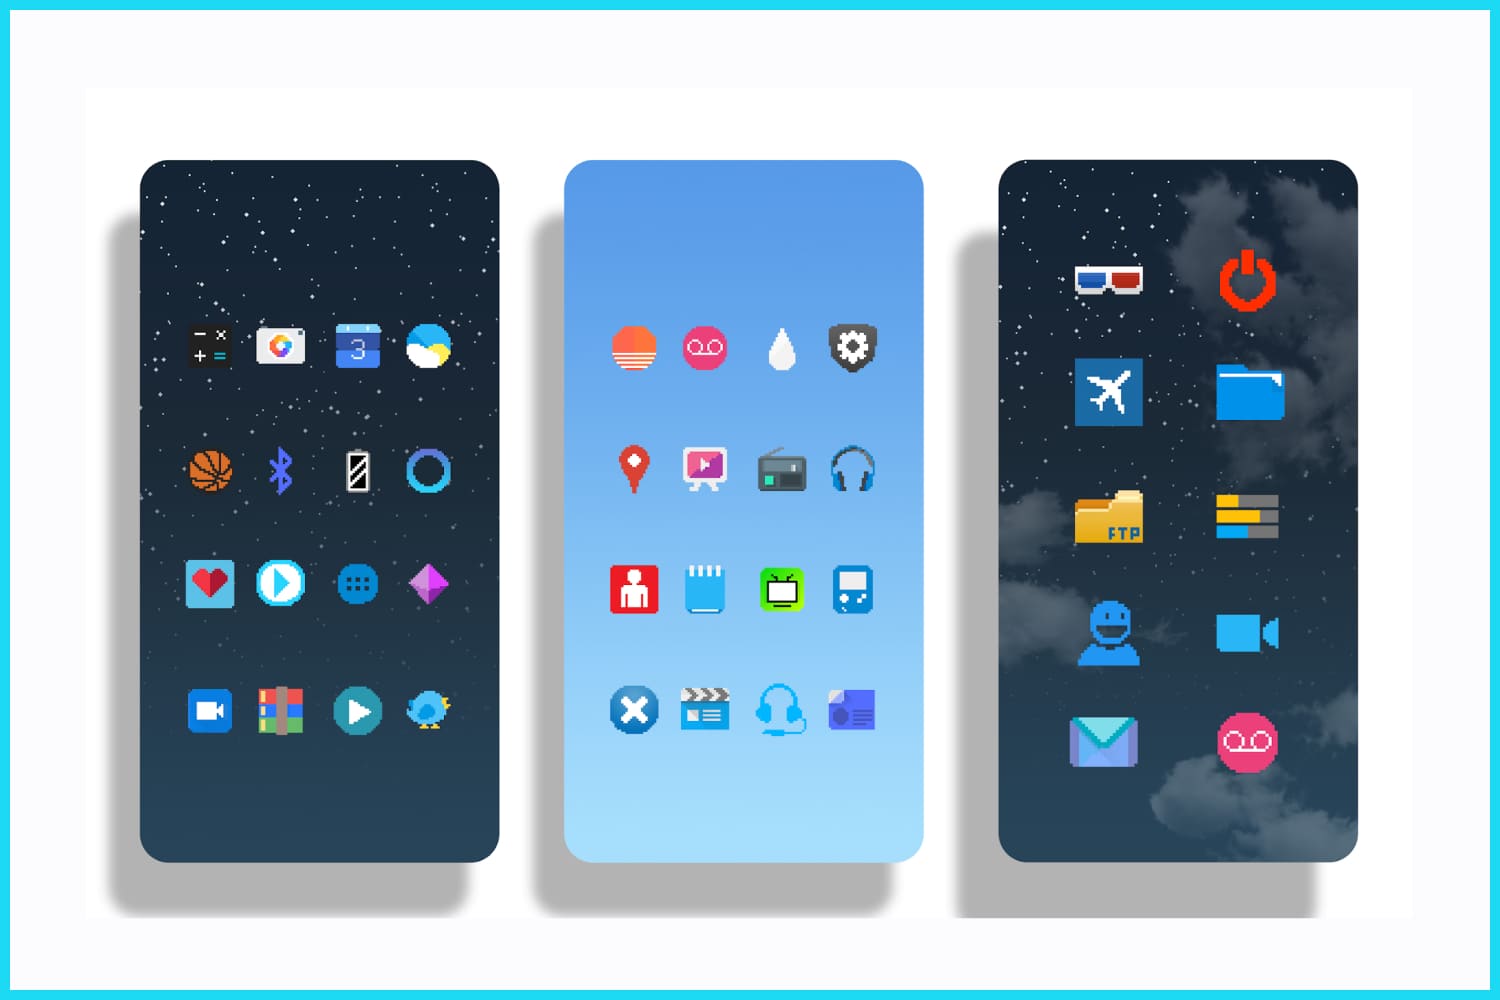 Collage of smartphone screens with icons in retro style on them.